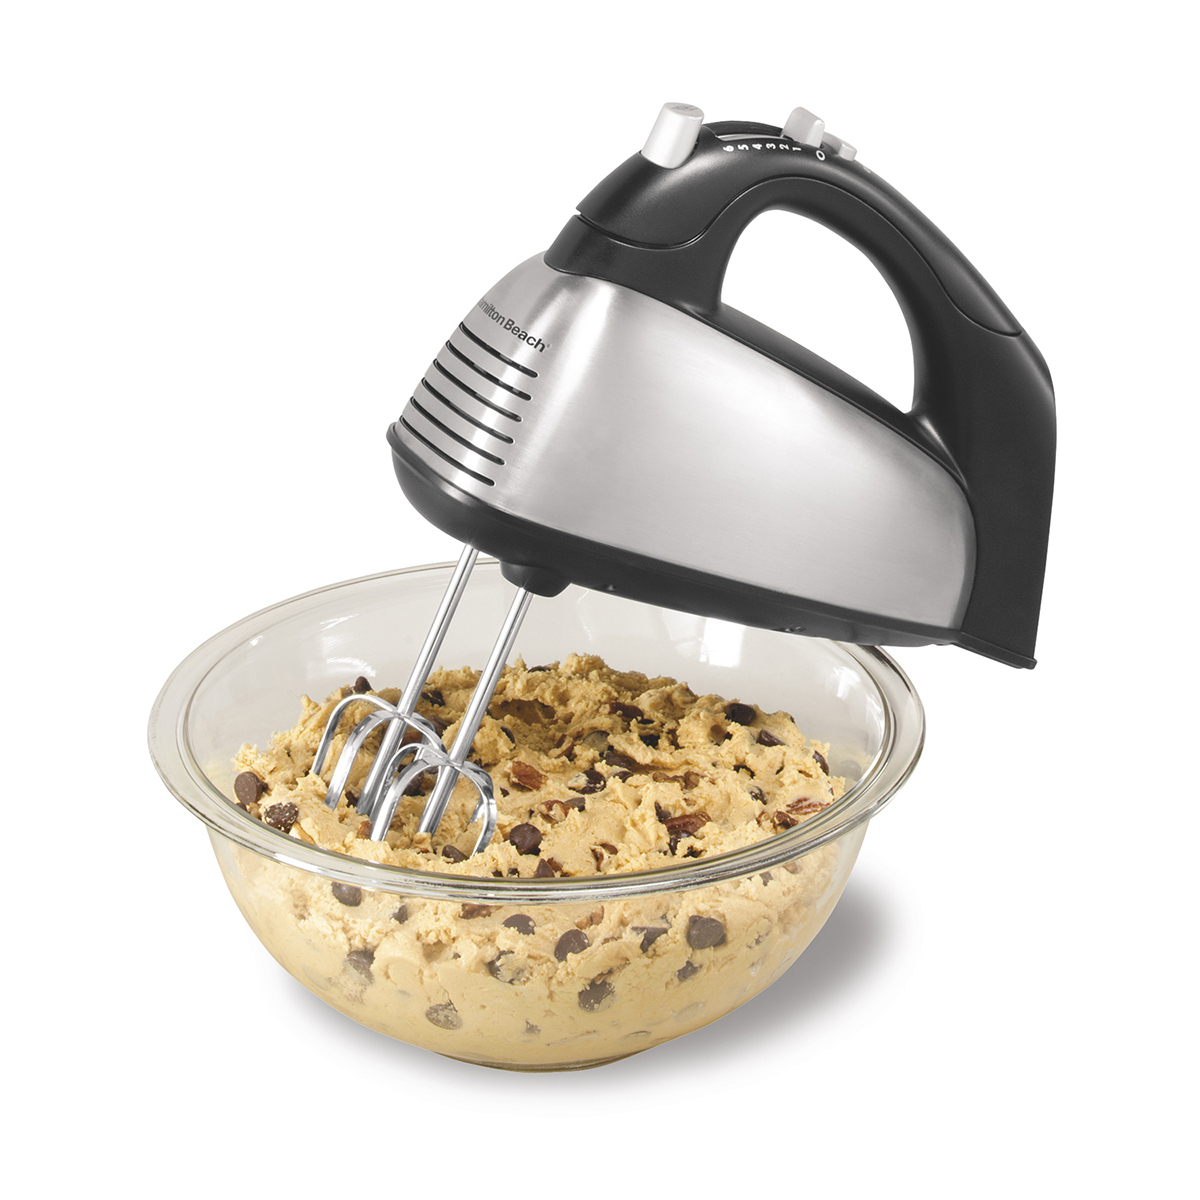 6 Speed Classic Hand Mixer w/ Snap-on Case (62650)